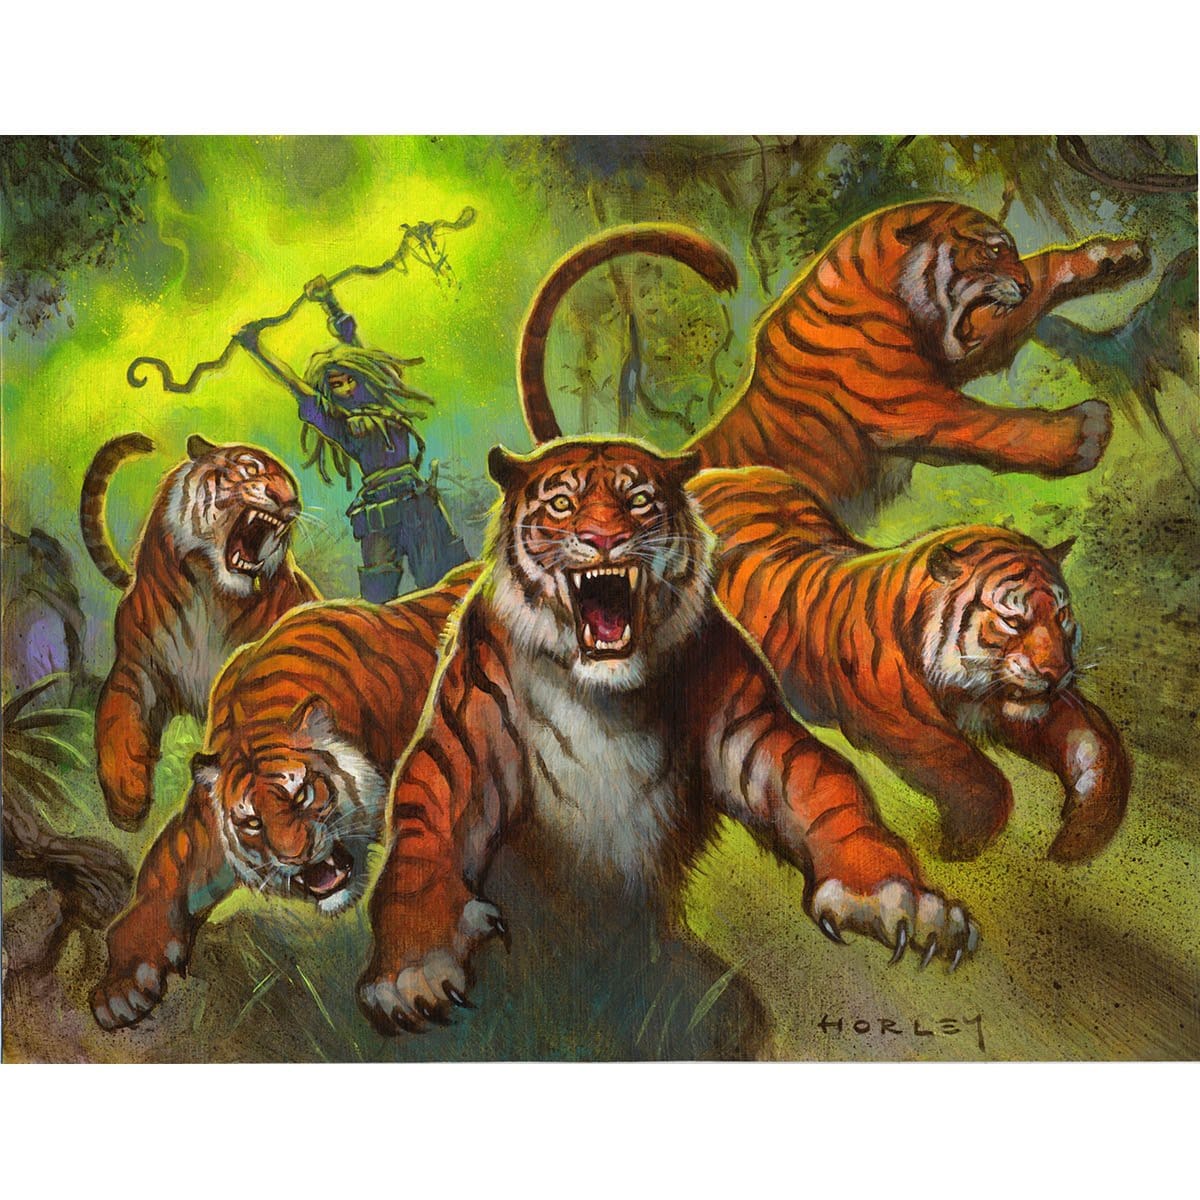 Beastmaster Ascension Print - Print - Original Magic Art - Accessories for Magic the Gathering and other card games